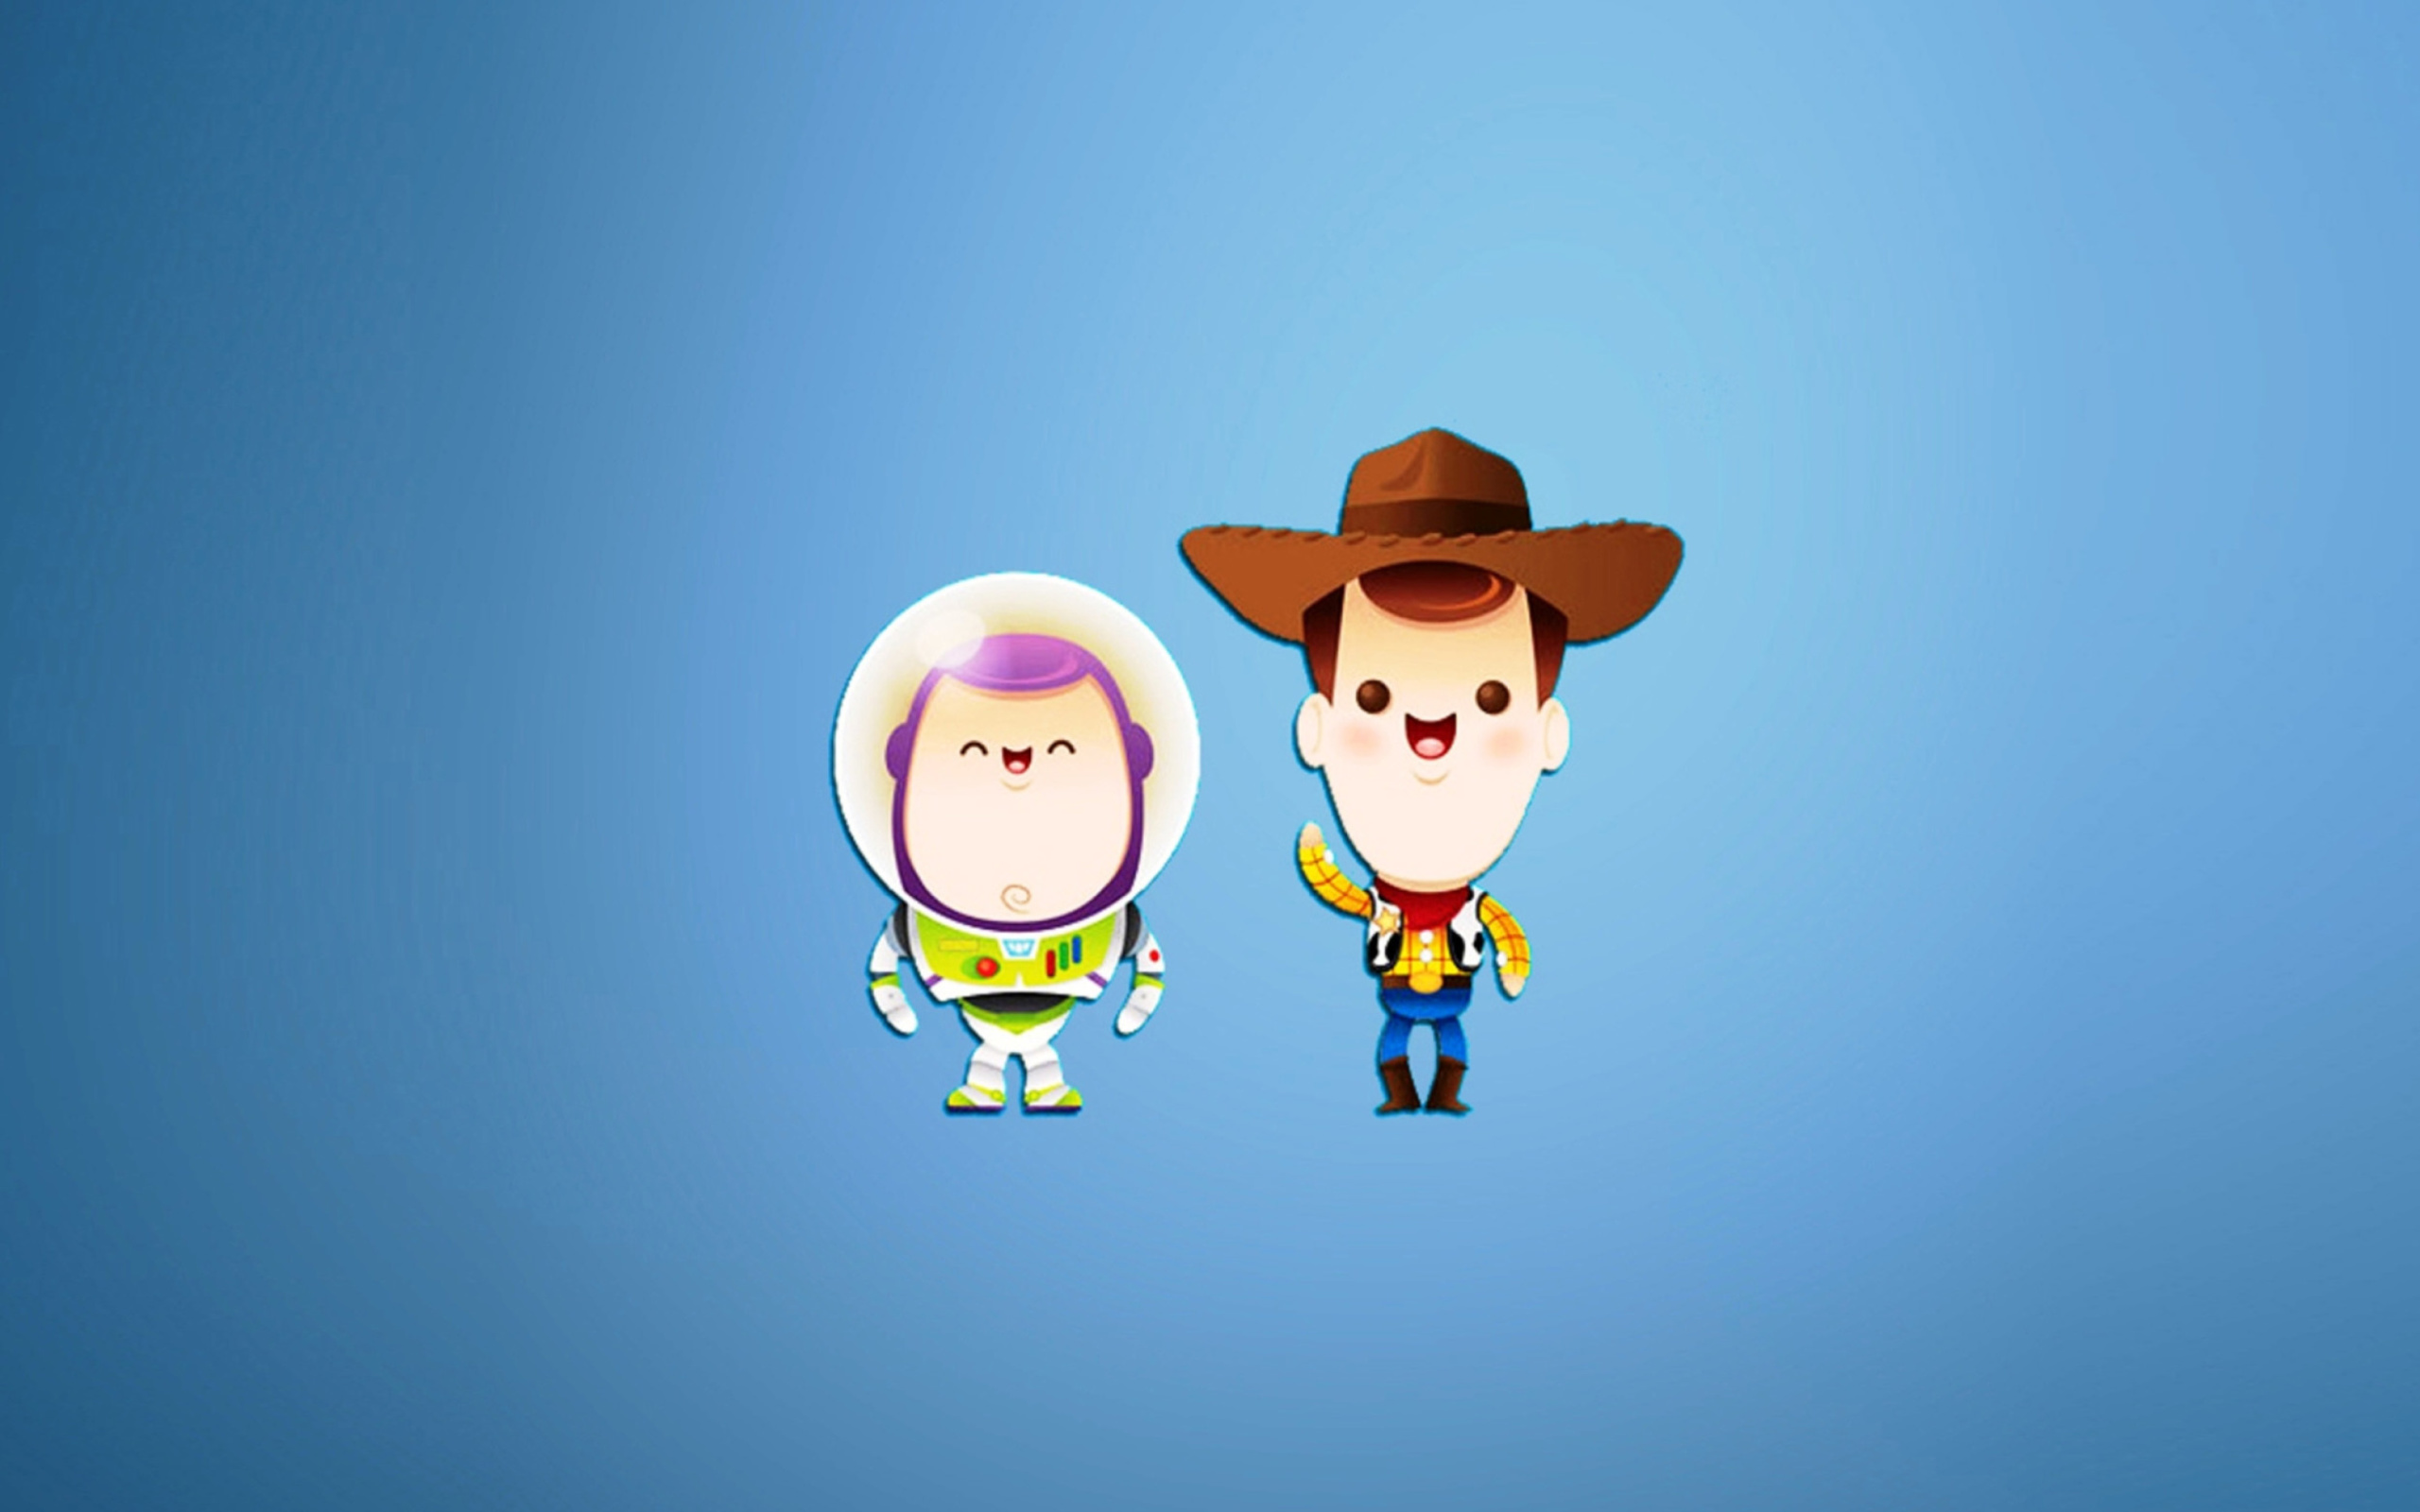 Buzz and Woody in Toy Story wallpaper 2560x1600